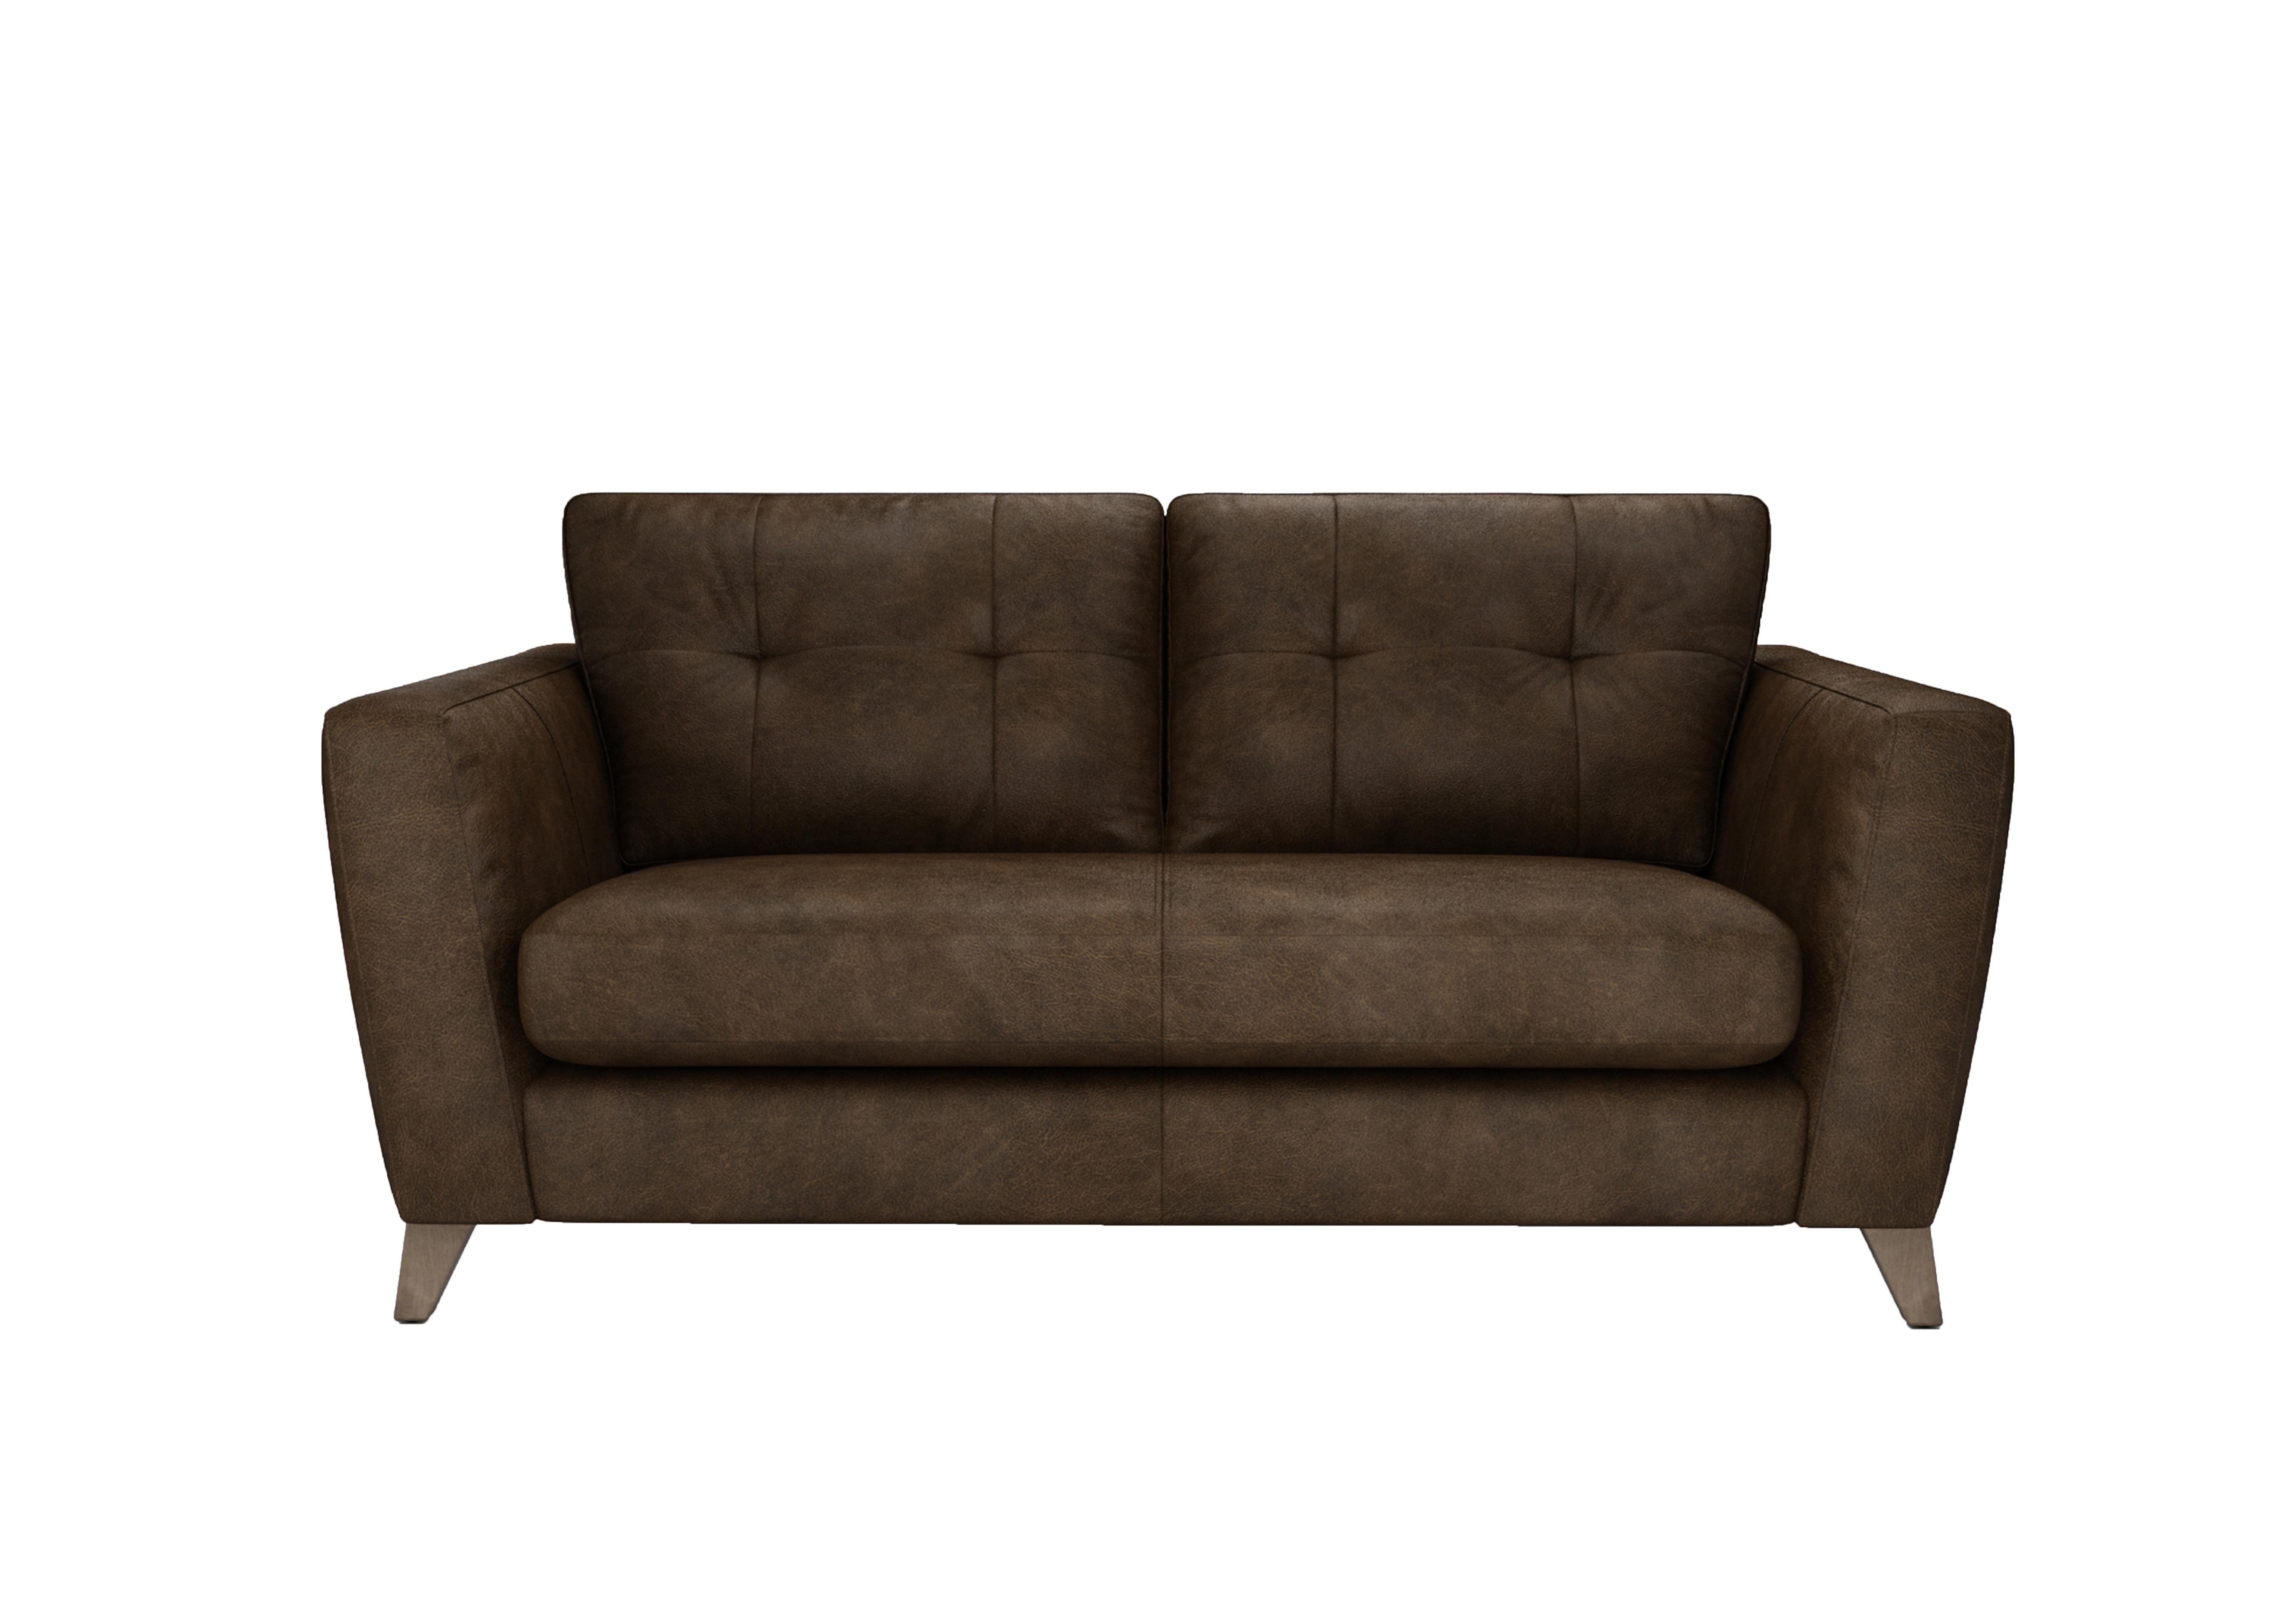 Hermione 2.5 Seater Leather Sofa in Bou192 Bourbon Wo Ft on Furniture Village